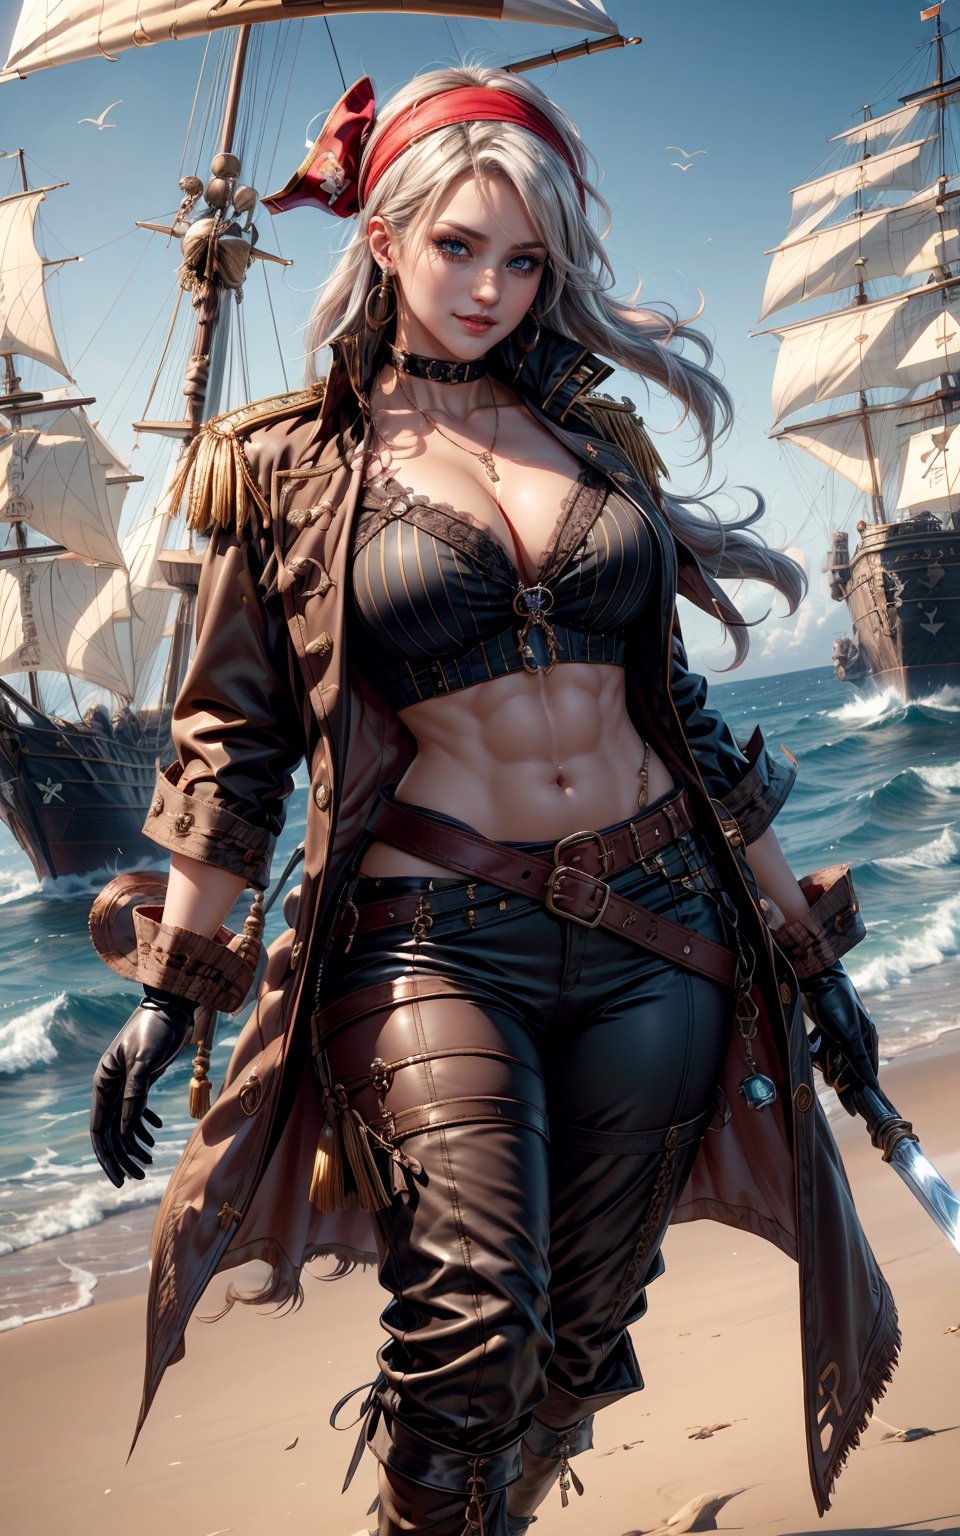 ((1 girl, adorable, happy)), ((gloves, headband, coat, open clothes, collared, epaulettes, cleavage, jewelry, earrings, midriff, belt, pants)), (white hair, short hair, blue eyes, makeup), (large breasts, large ass, thick thighs, wide hips, abs, voloptuous), holding weapon, sword, ship, barrel, ocean, sexypirate,